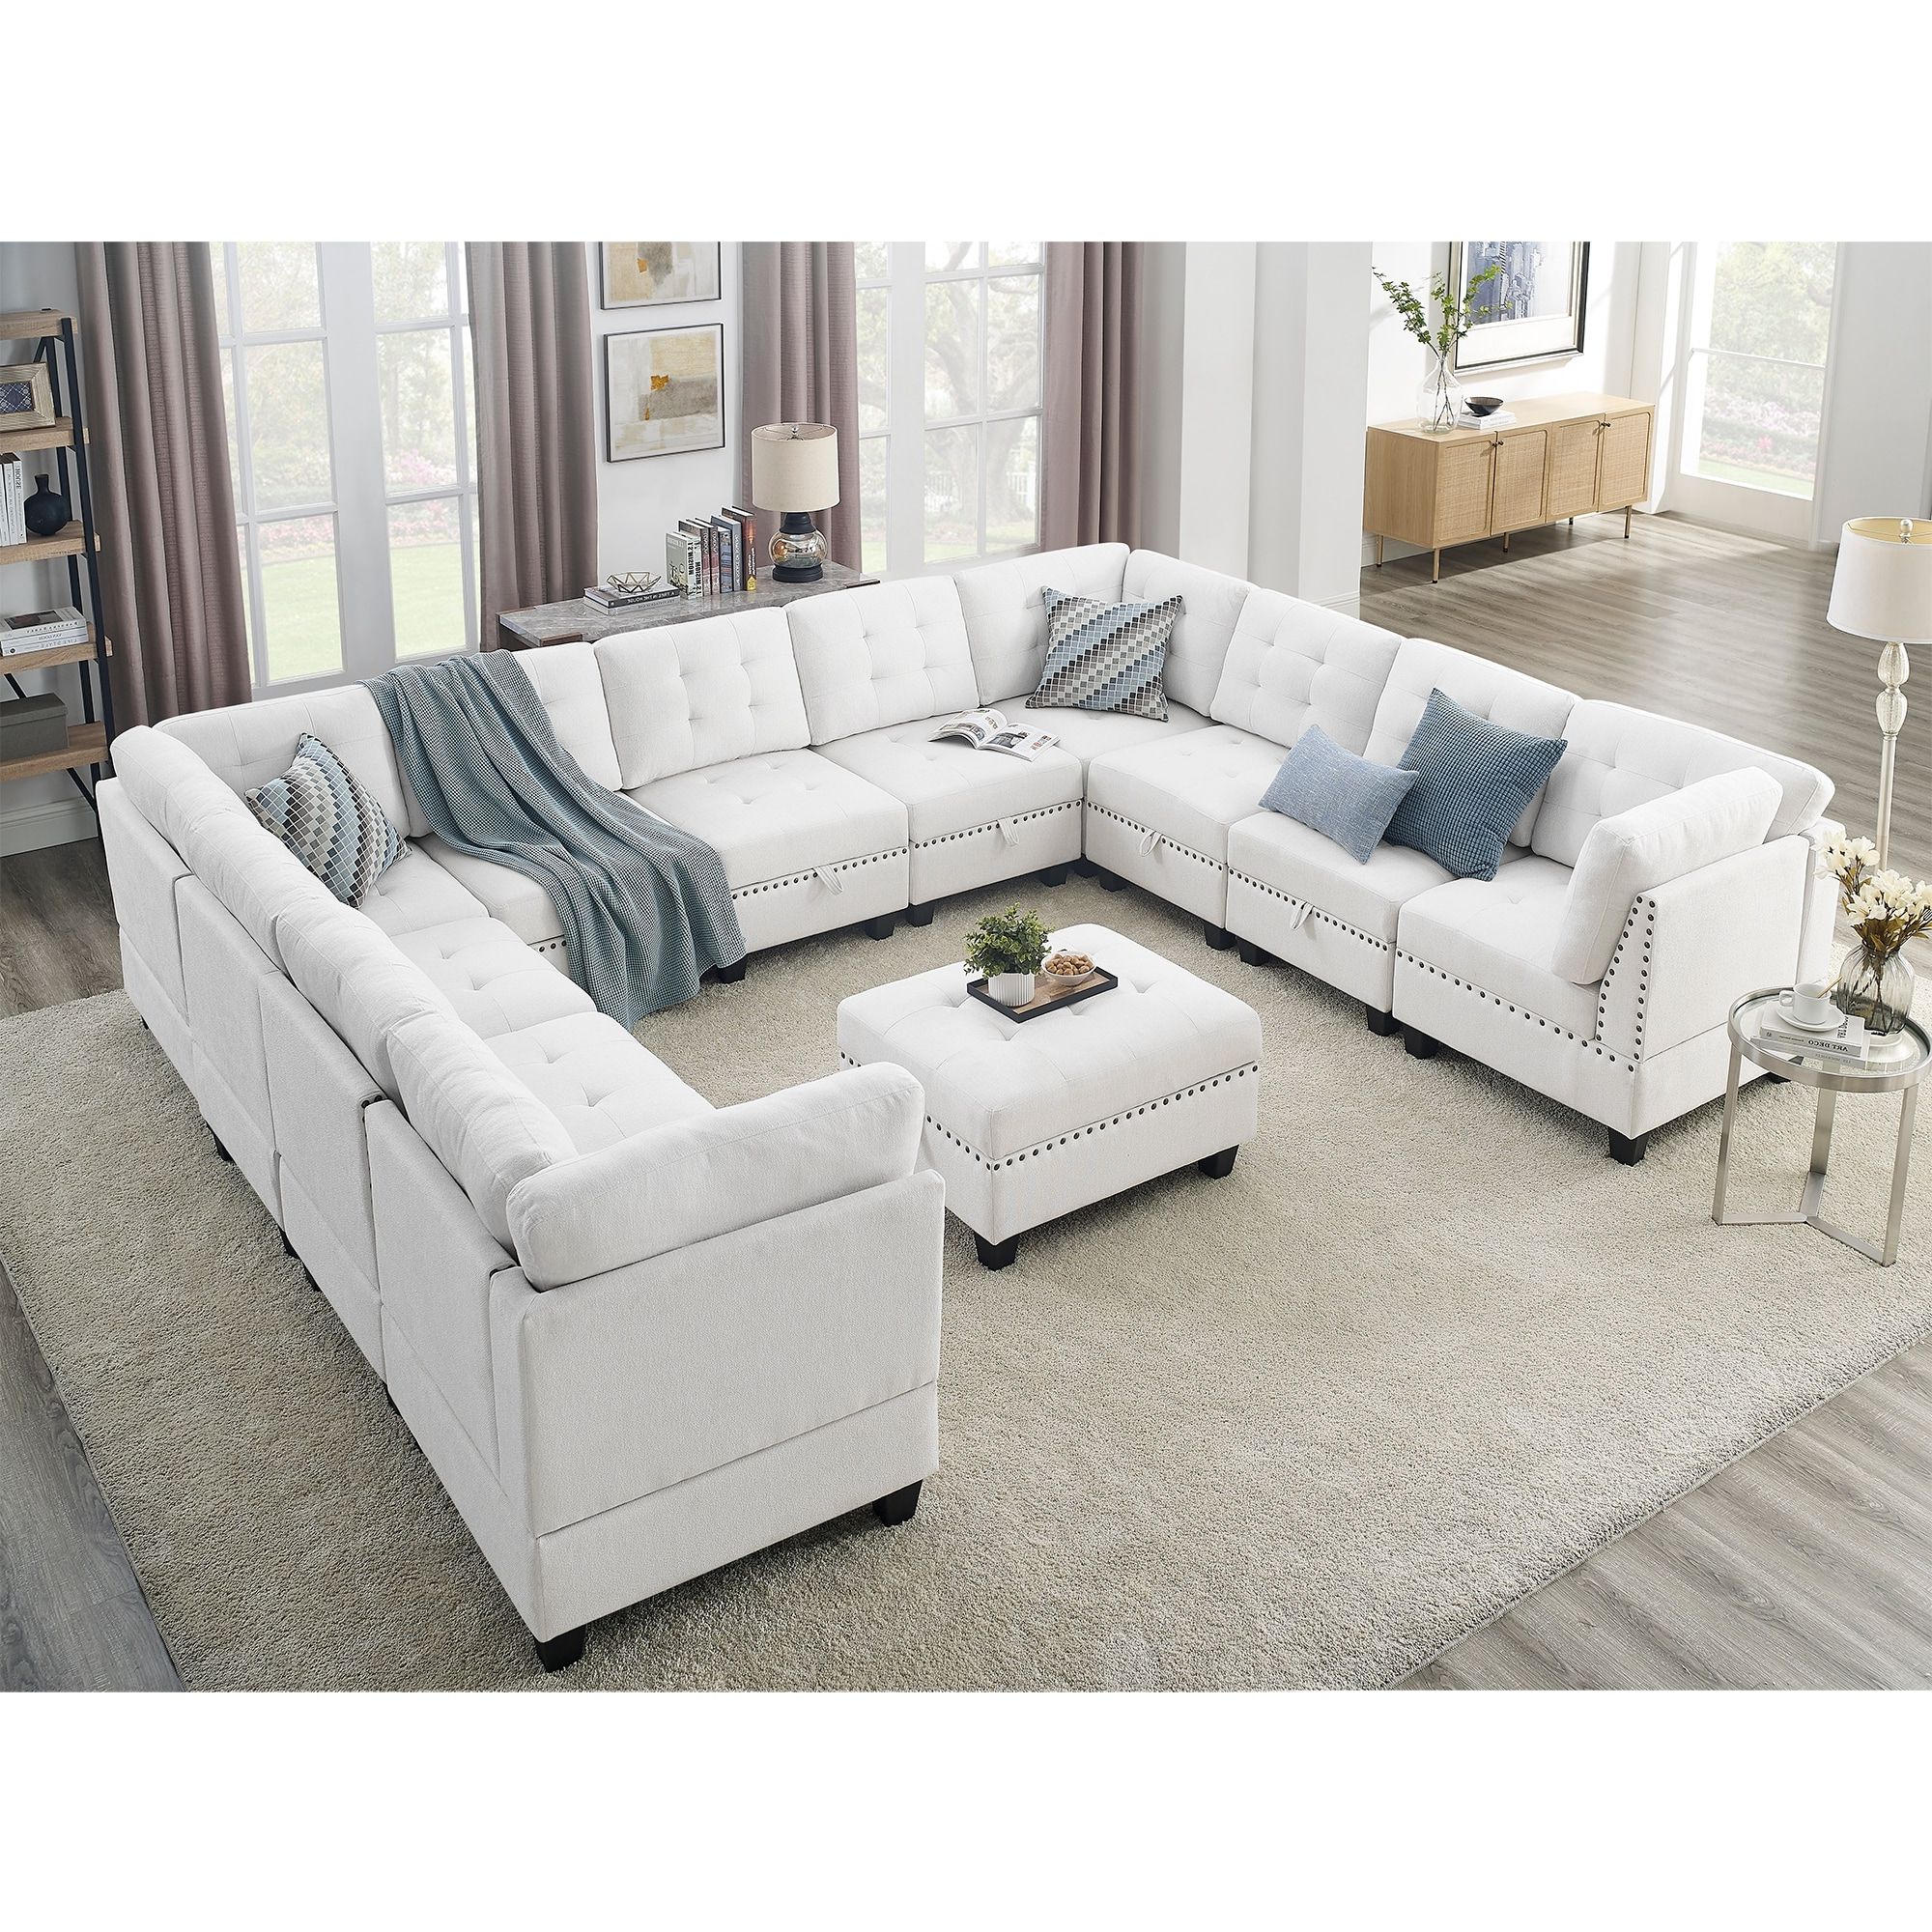 Chenille U Shaped Modular Sectional Sofa With Bonus Storage – On Sale – –  37703946 With Regard To U Shaped Modular Sectional Sofas (Gallery 8 of 20)